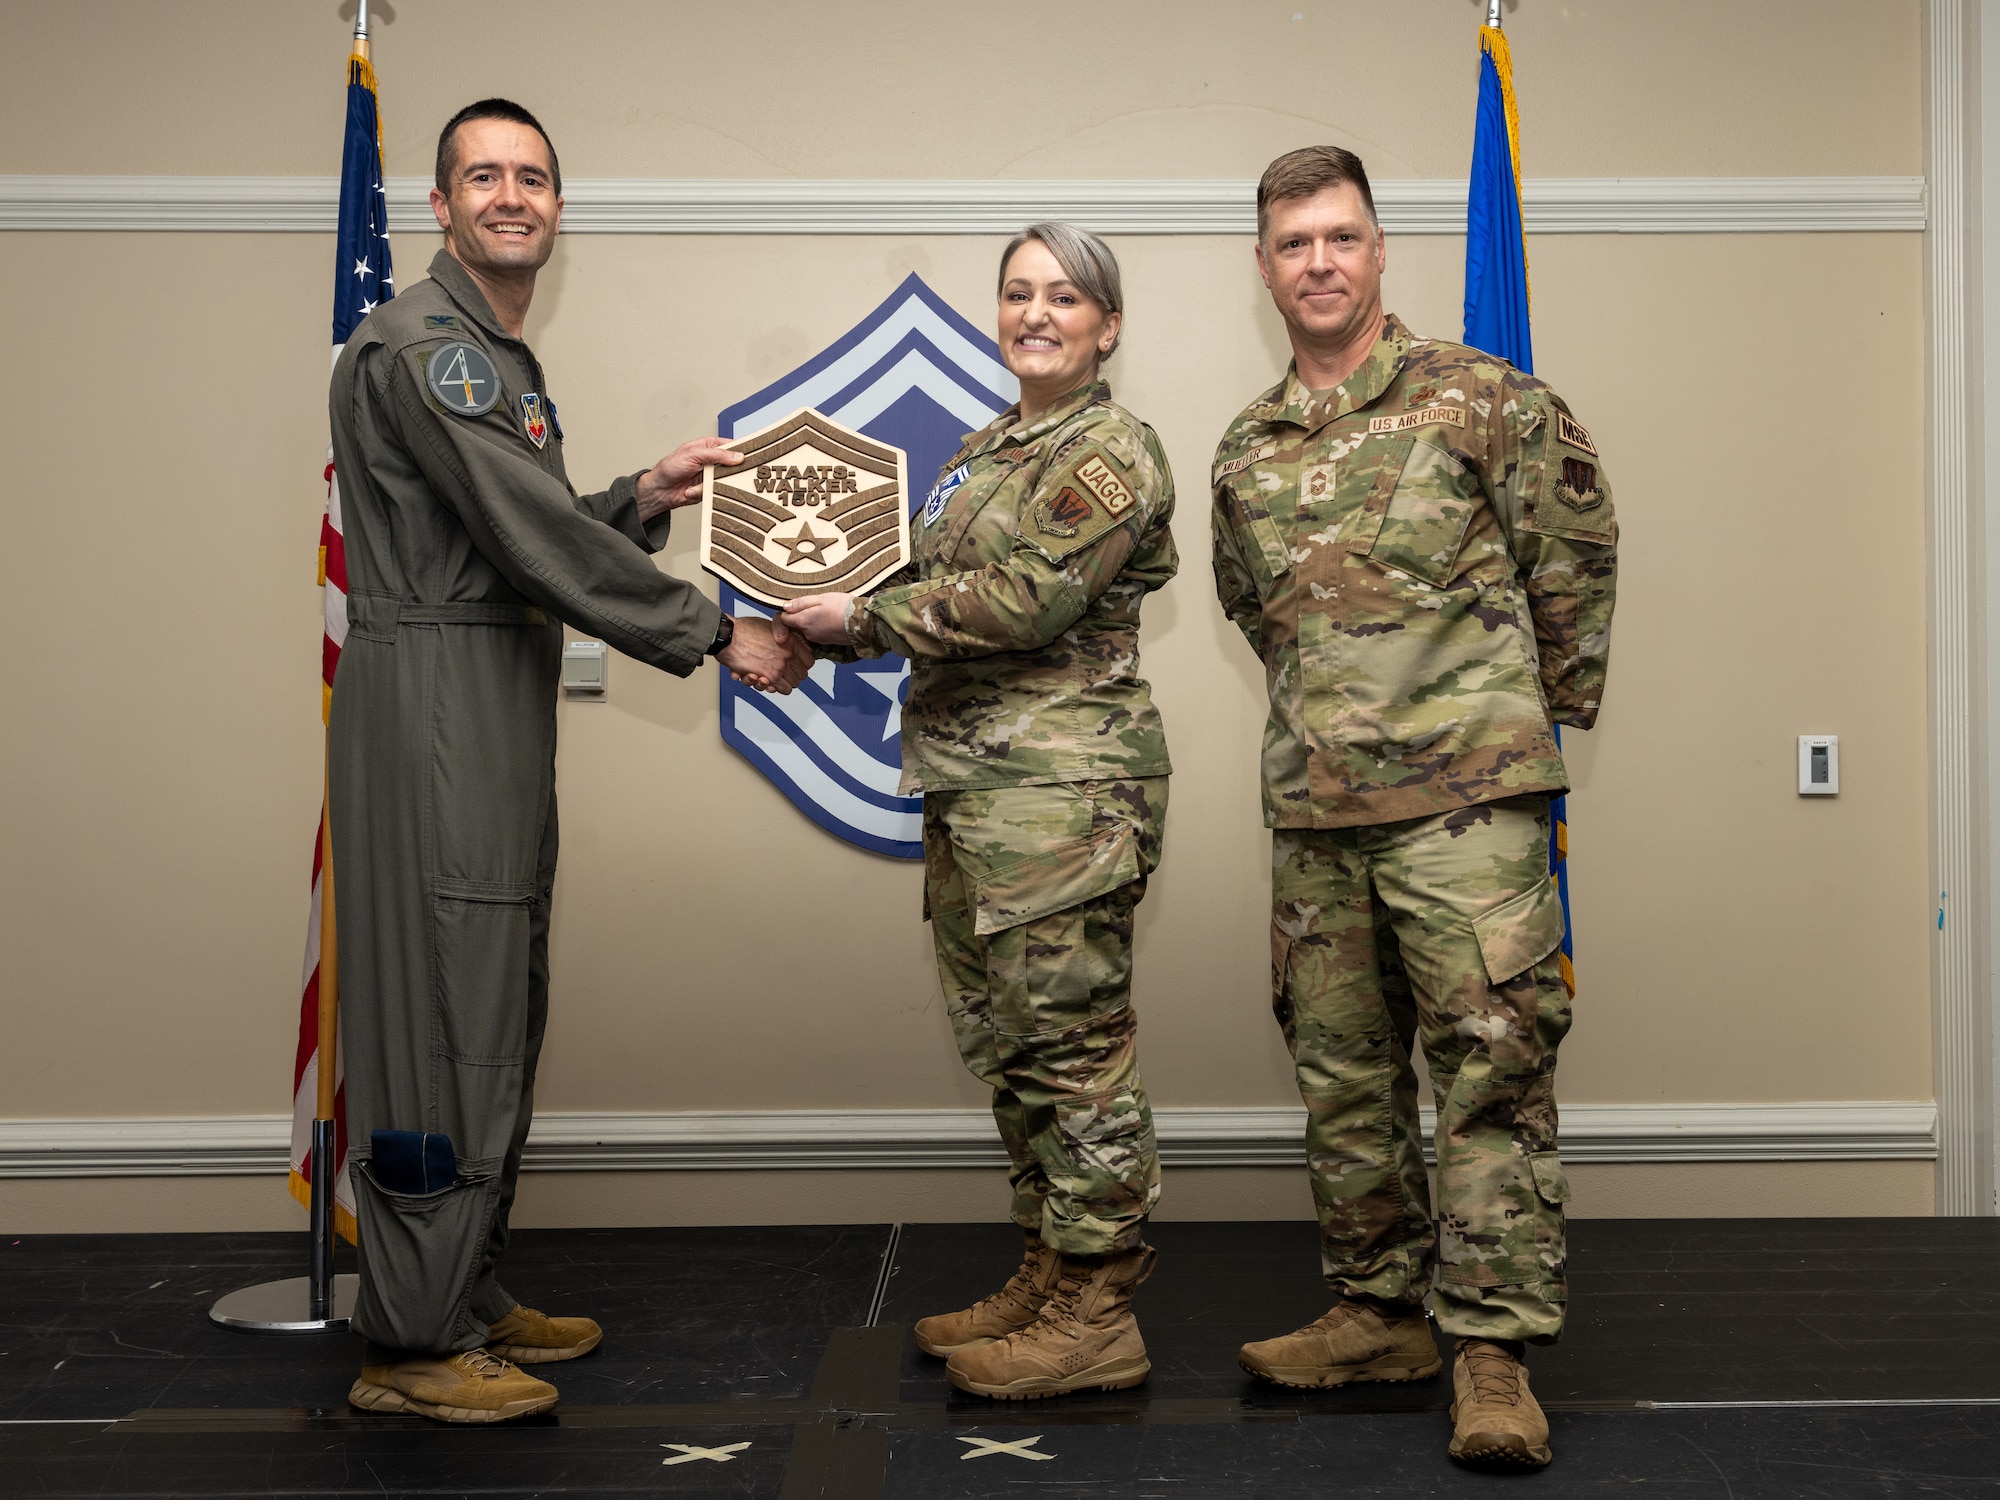 U.S Air Force Col. Morgan Lohse, 4th Fighter Wing commander (left), and Chief Master Sgt. Edward Mueller, Mission support Group senior enlisted leader, presents a plaque to Senior Master Sgt. select Mary Staats Walker (center), law office superintendent, during a Senior Master Sergeant release ceremony at Seymour Johnson Air Force Base, North Carolina, March 28, 2024. The ceremony allowed wing leadership, family and friends to recognize the base’s newest Senior Master Sergeant selects. (U.S. Air Force photo by Airman Megan Cusmano)